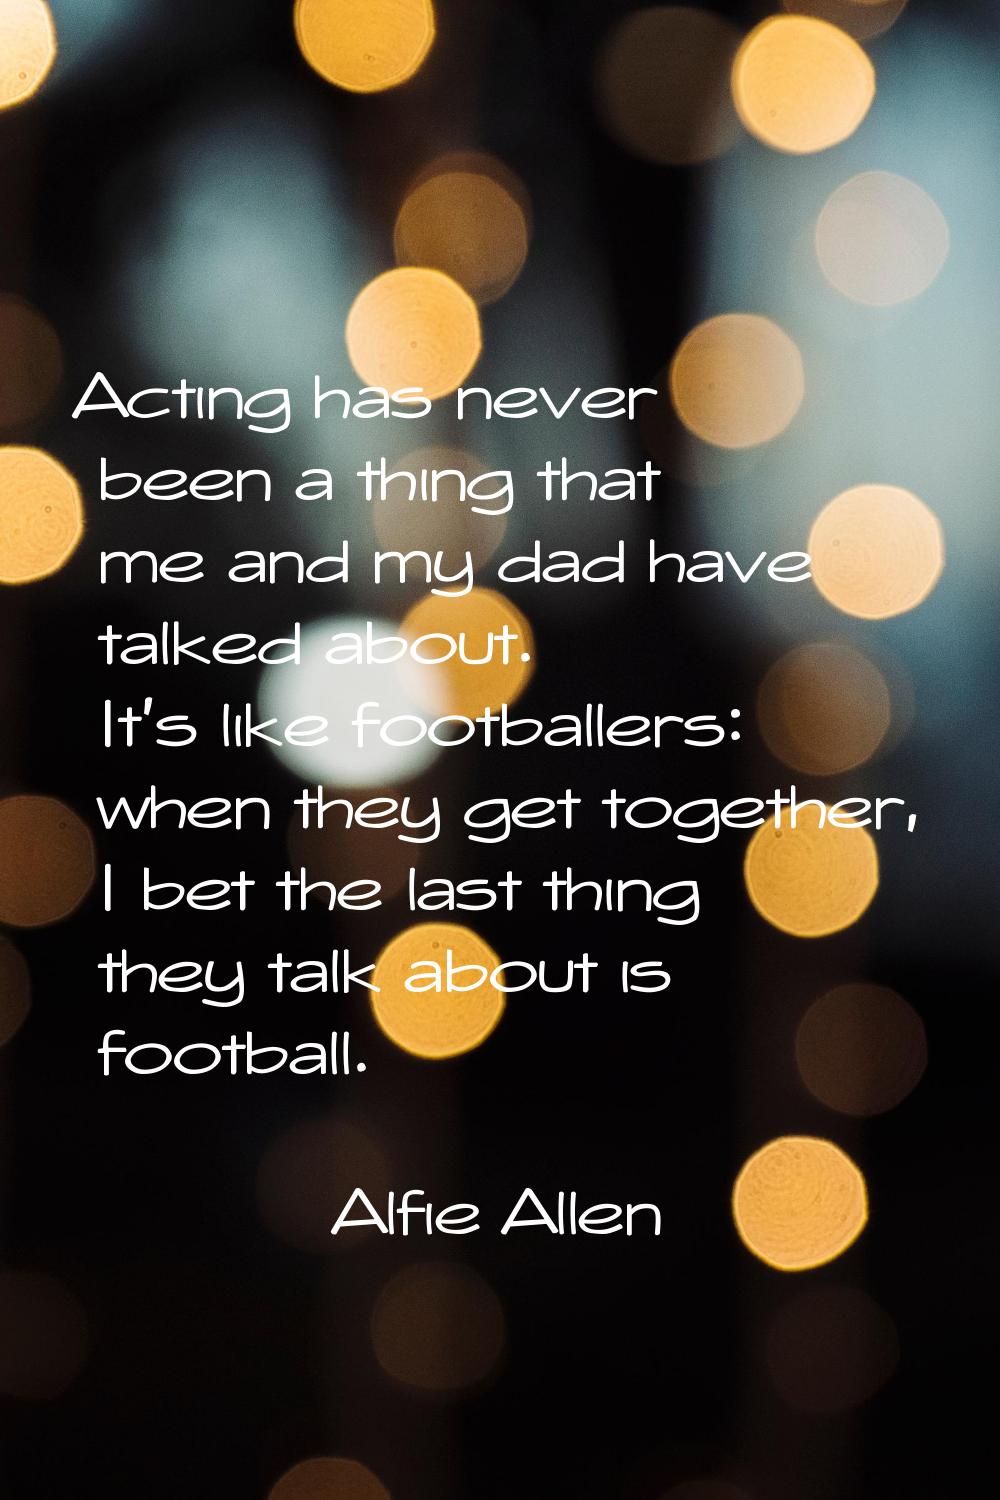 Acting has never been a thing that me and my dad have talked about. It's like footballers: when the